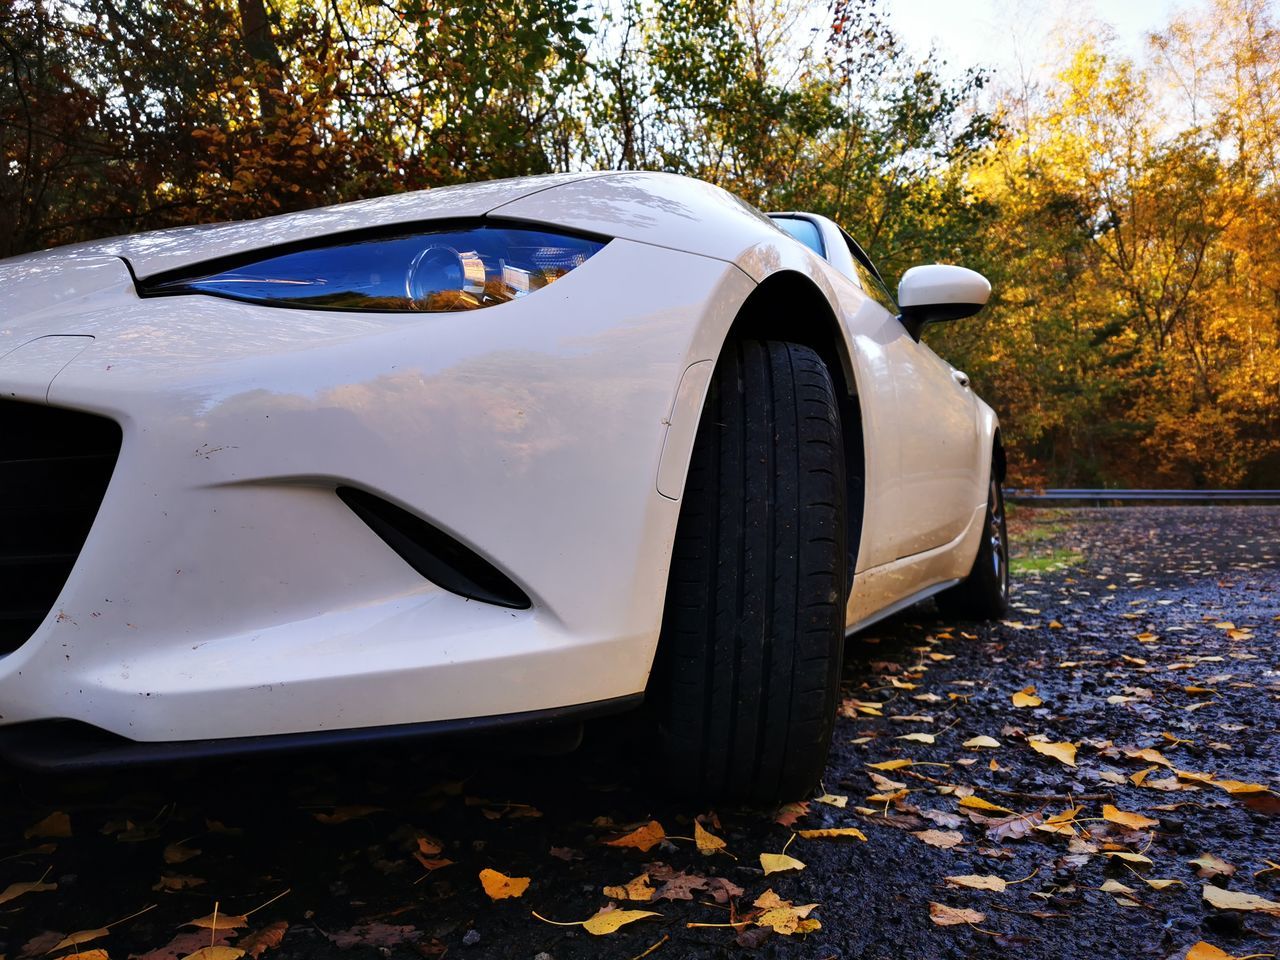 car, vehicle, land vehicle, mode of transportation, transportation, automobile, motor vehicle, autumn, supercar, tree, leaf, plant part, sports car, plant, nature, wheel, no people, outdoors, forest, performance car, white, day